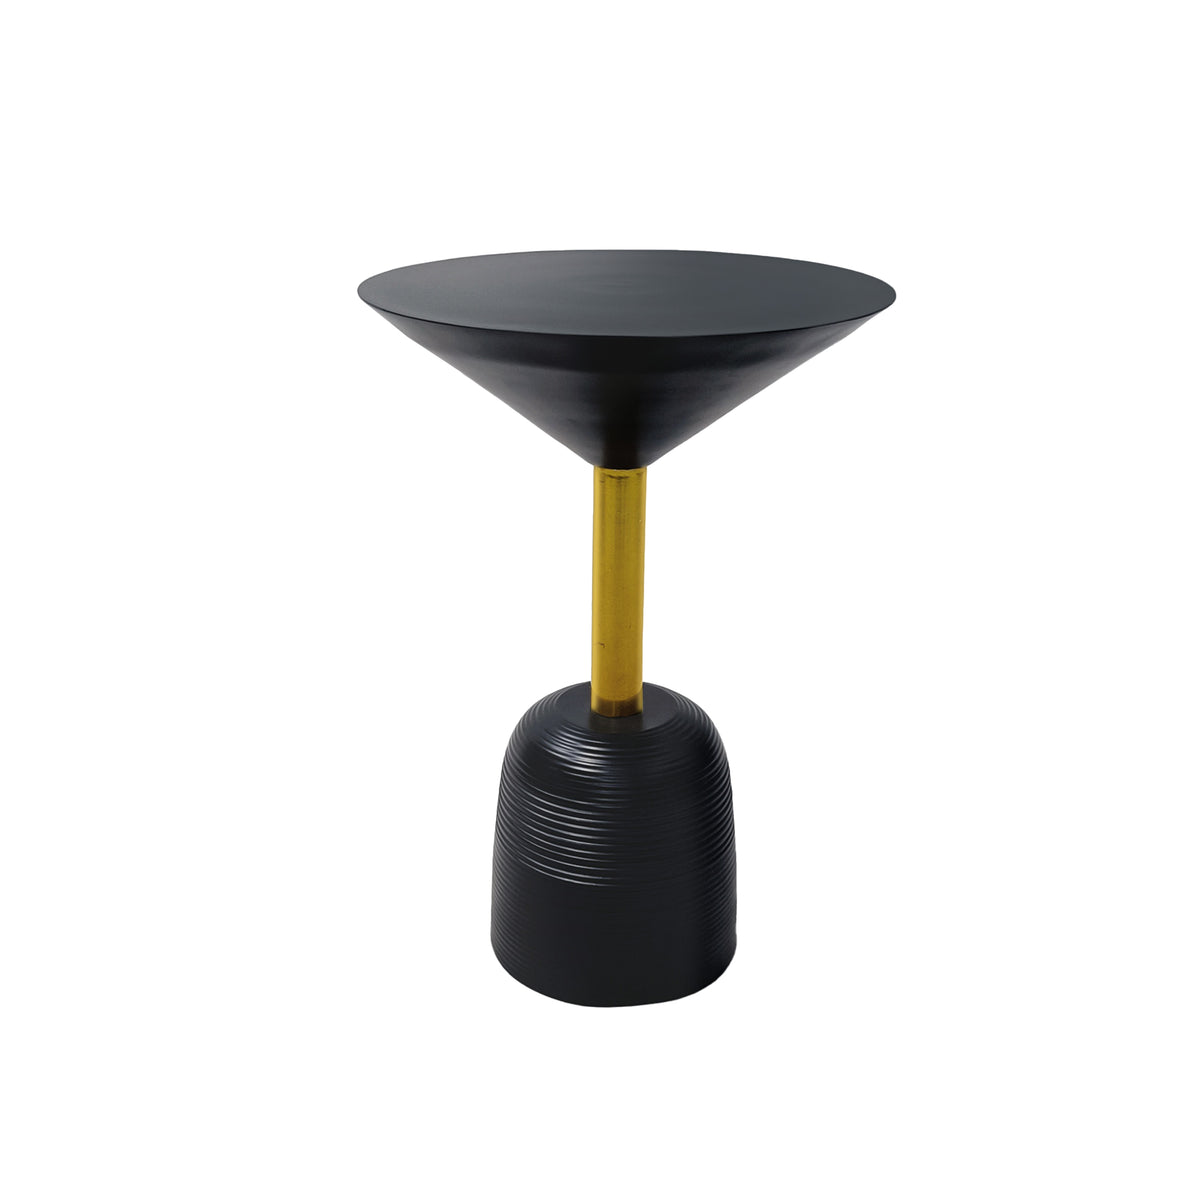 12 Inch Round Cocktail Side End Table, Aluminum Cast Top and Dome Base, Black, Brass - UPT-298839